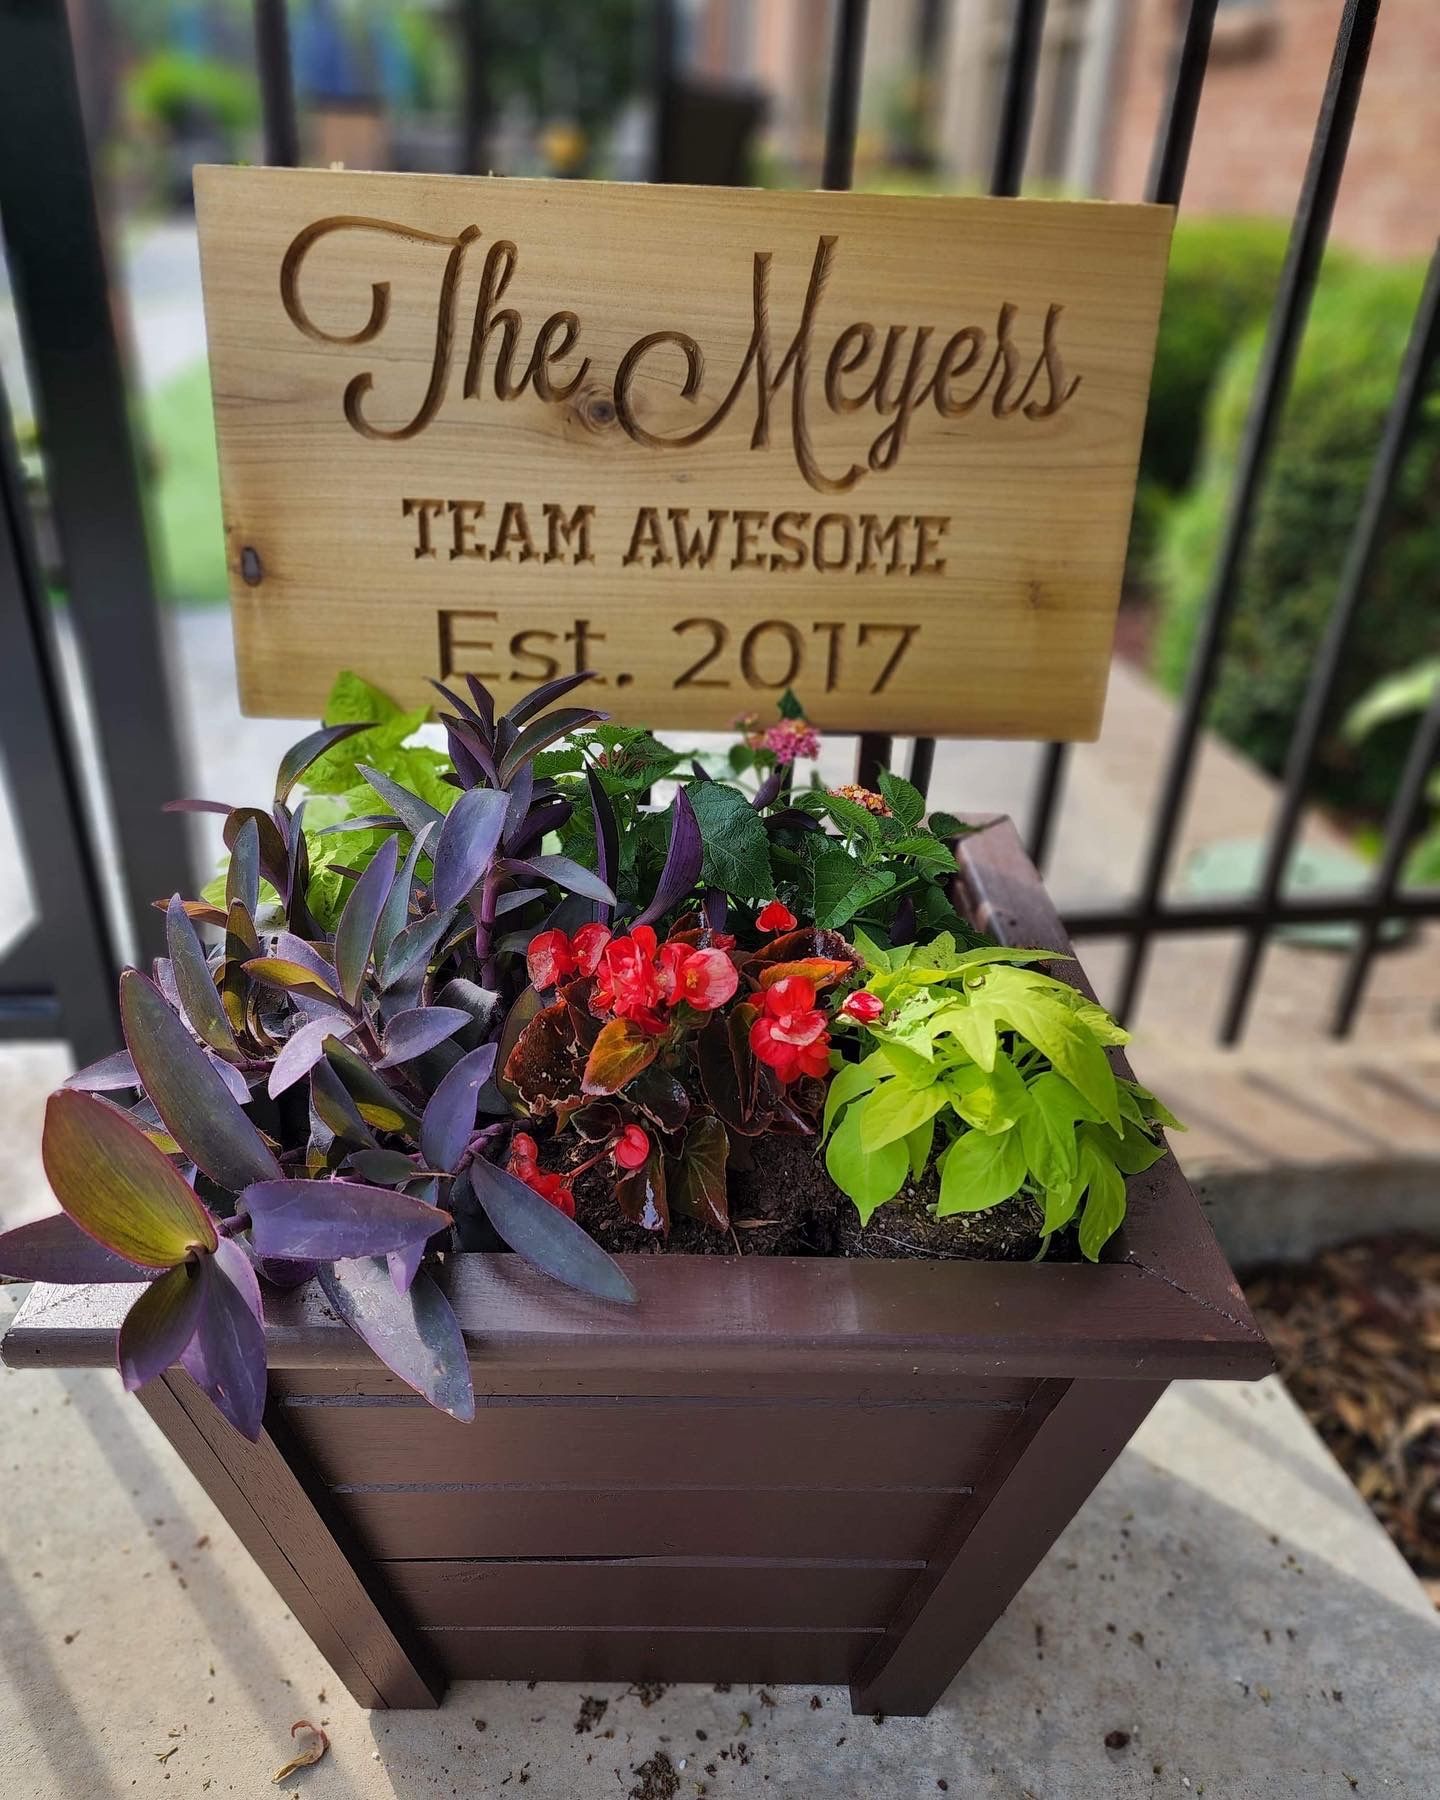 A wooden planter with flowers and a sign that says `` the meyers team awesome est . 2017 ''